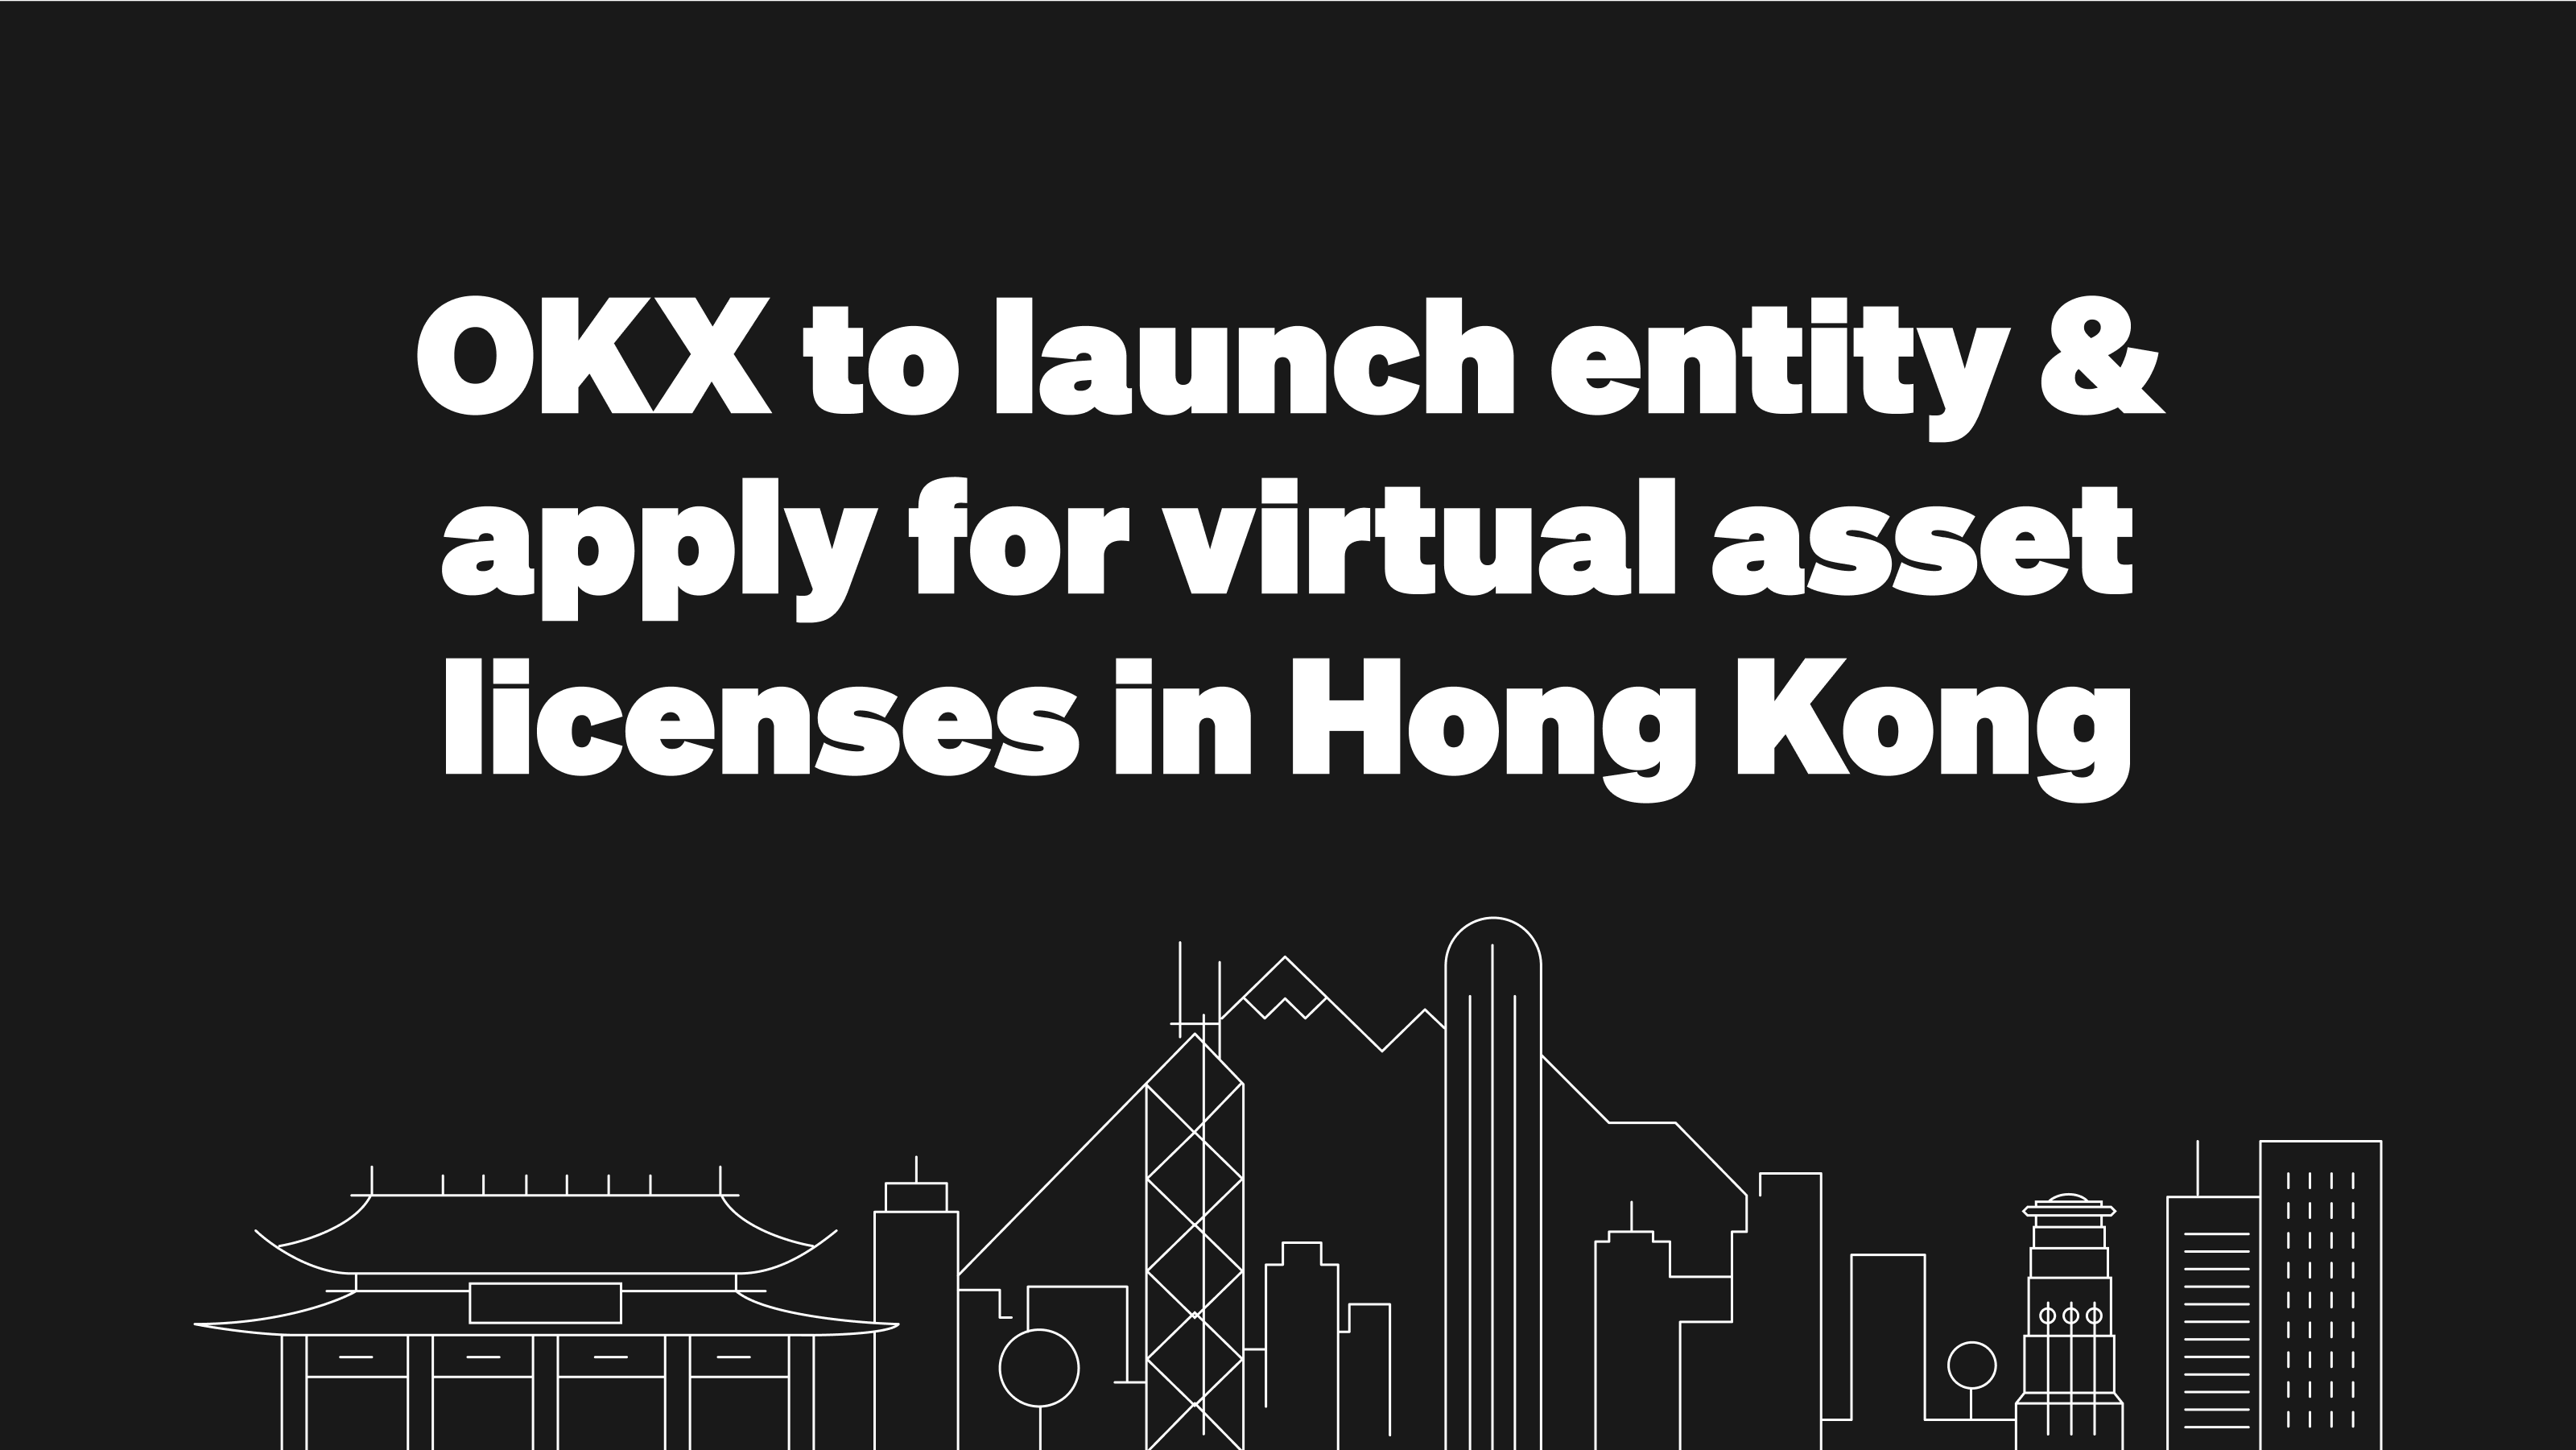 OKX to Launch Hong Kong Entity, Apply for Virtual Asset Licenses 